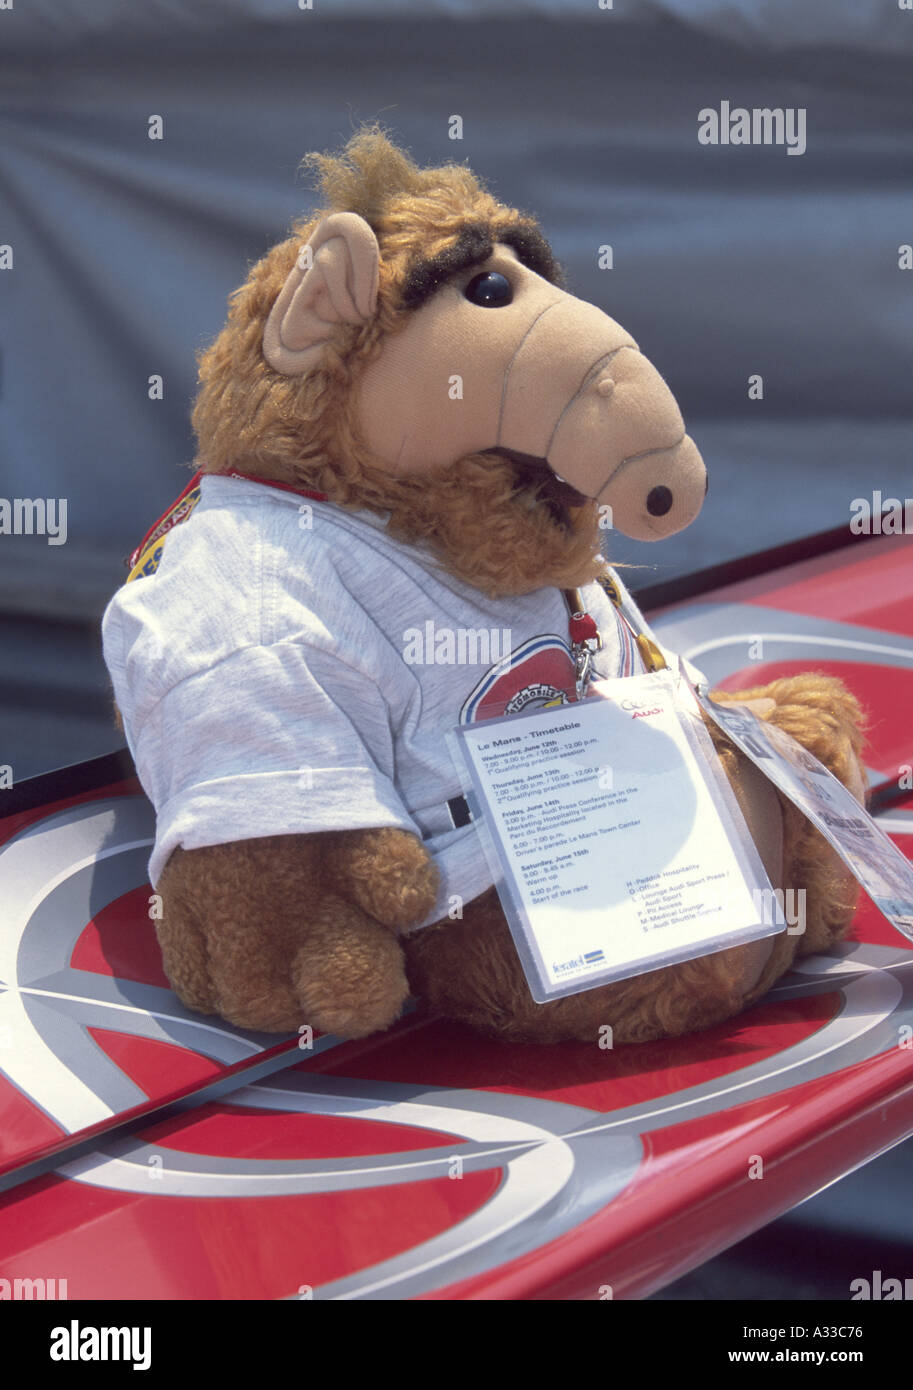 Television character ALF sits on the rear wing of an Audi R8 at the Mid Ohio ALMS race 2002 Stock Photo